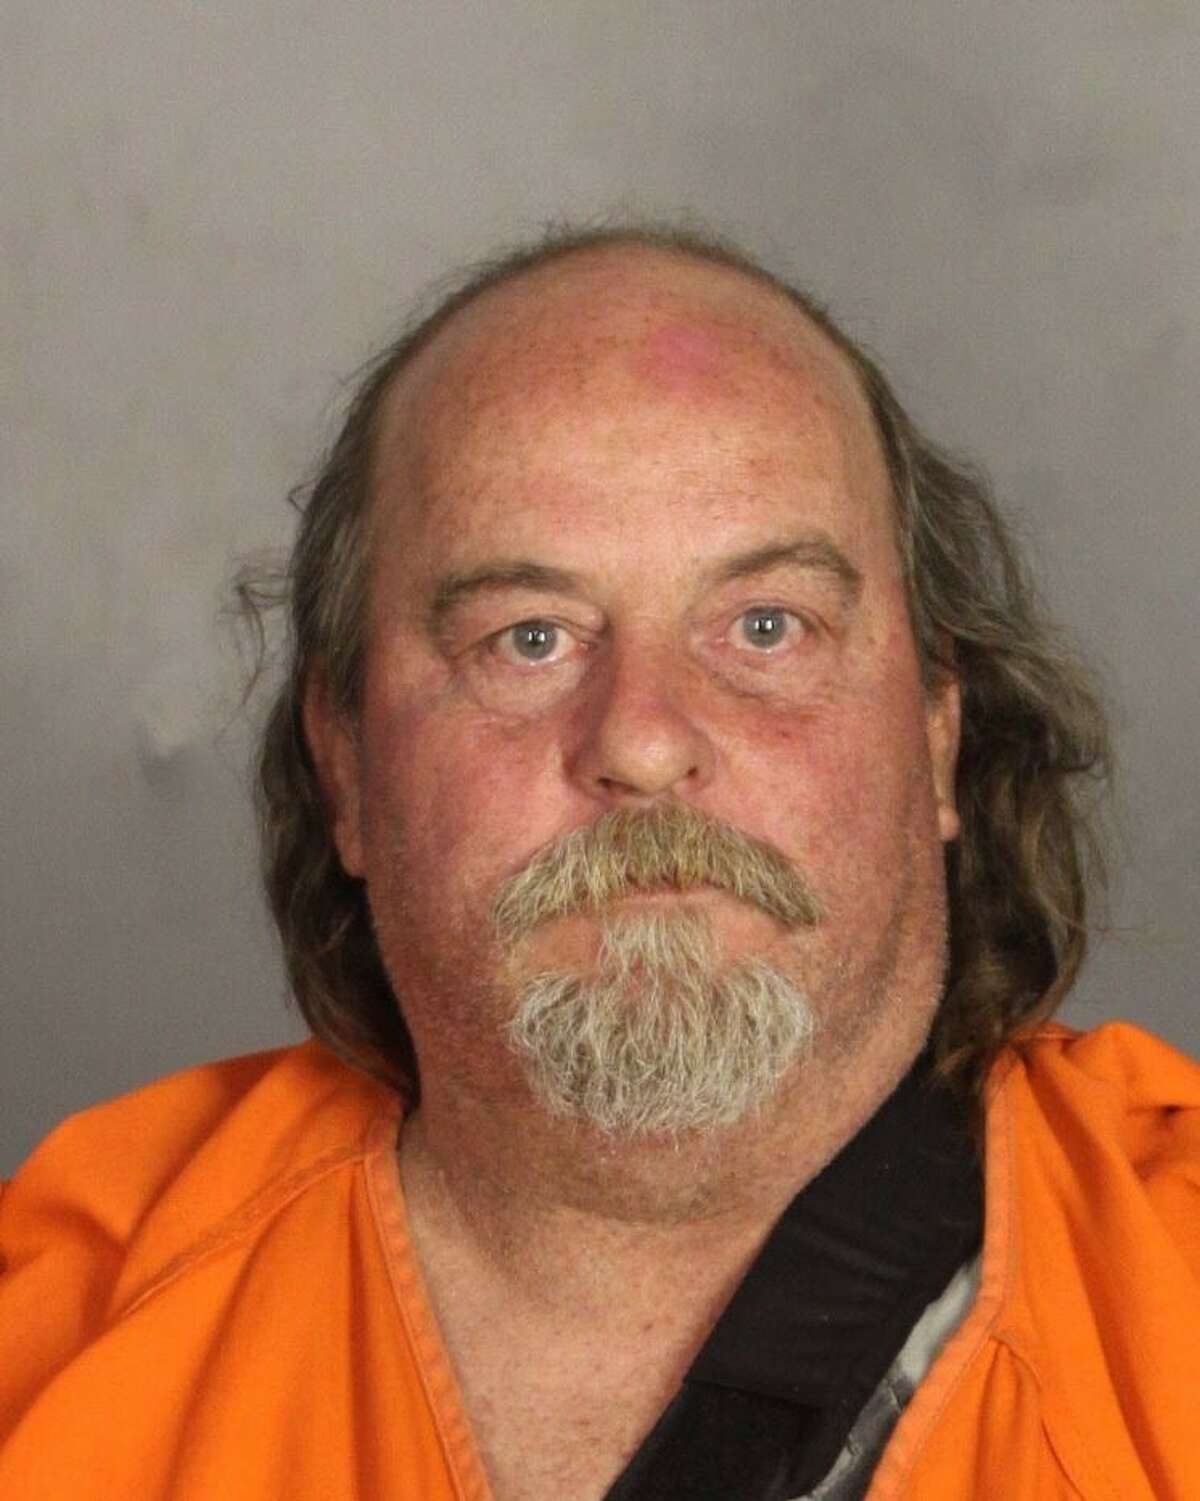 George Rogers, 52, was booked and charged with engaging in organized criminal activity in connection to a shooting involving motorcycle gangs at a Twin Peaks restaurant in Waco at around noon on May 17, 2015. The shooting left nine dead and 18 injured.